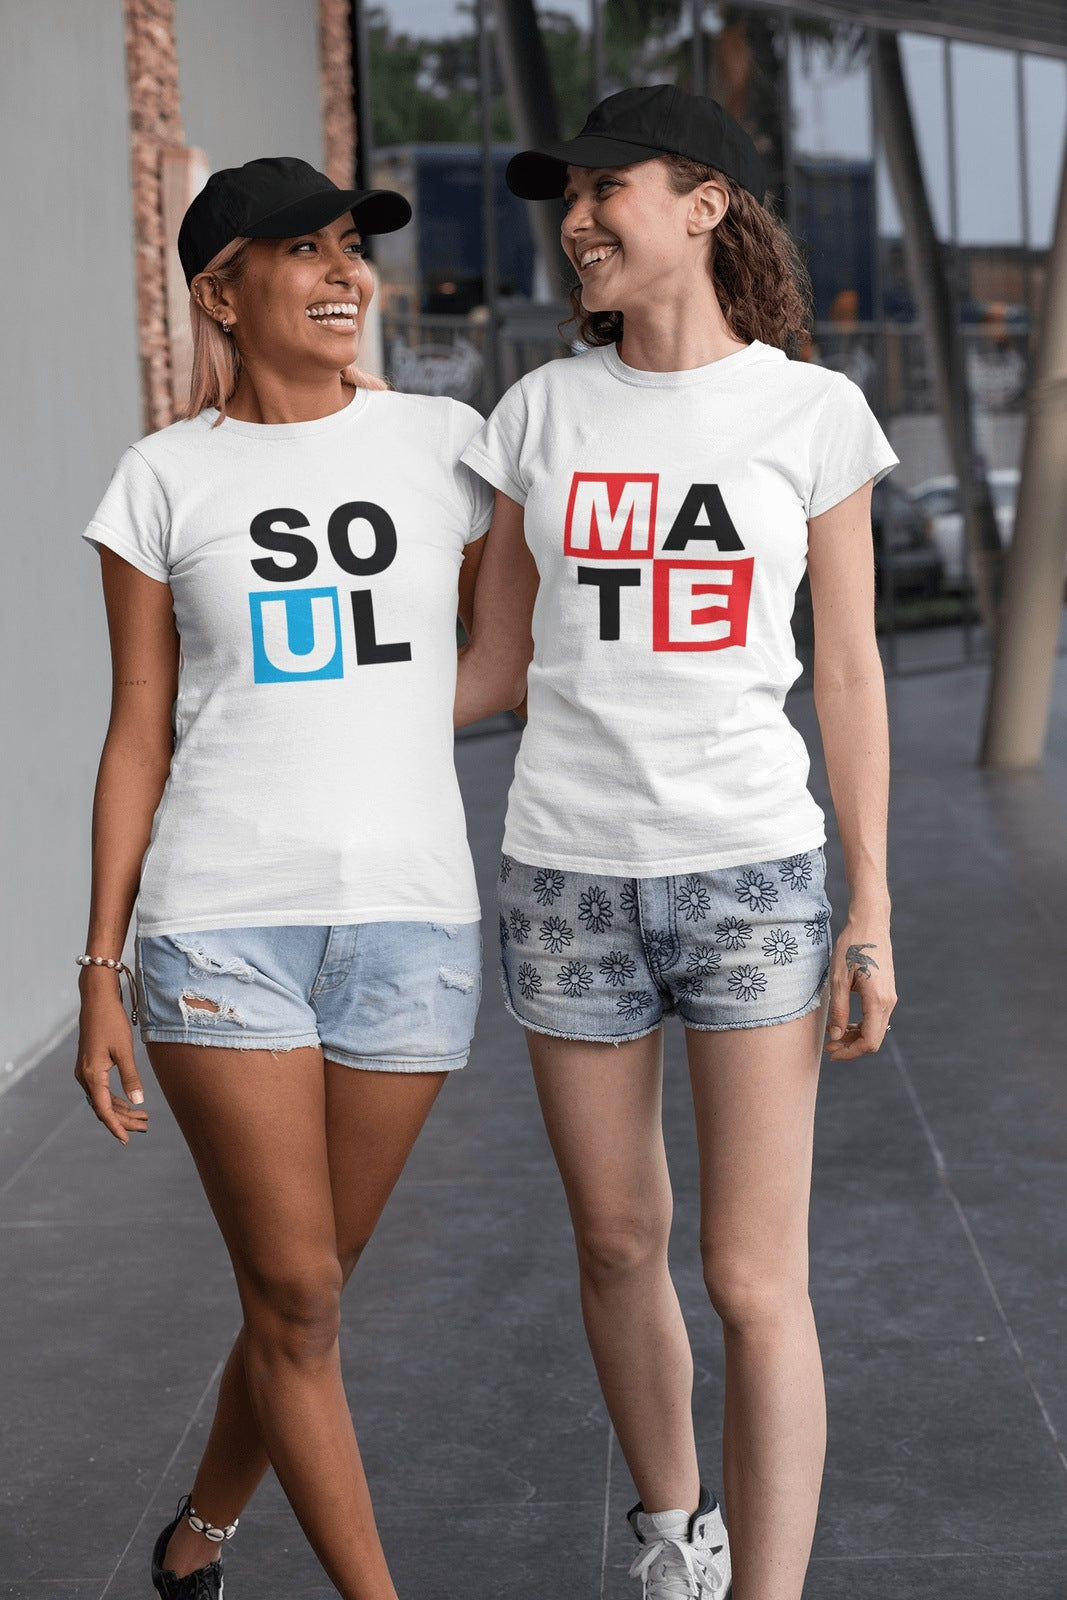 Pride T Shirts For Women In White Colour - Soul Mate Variant